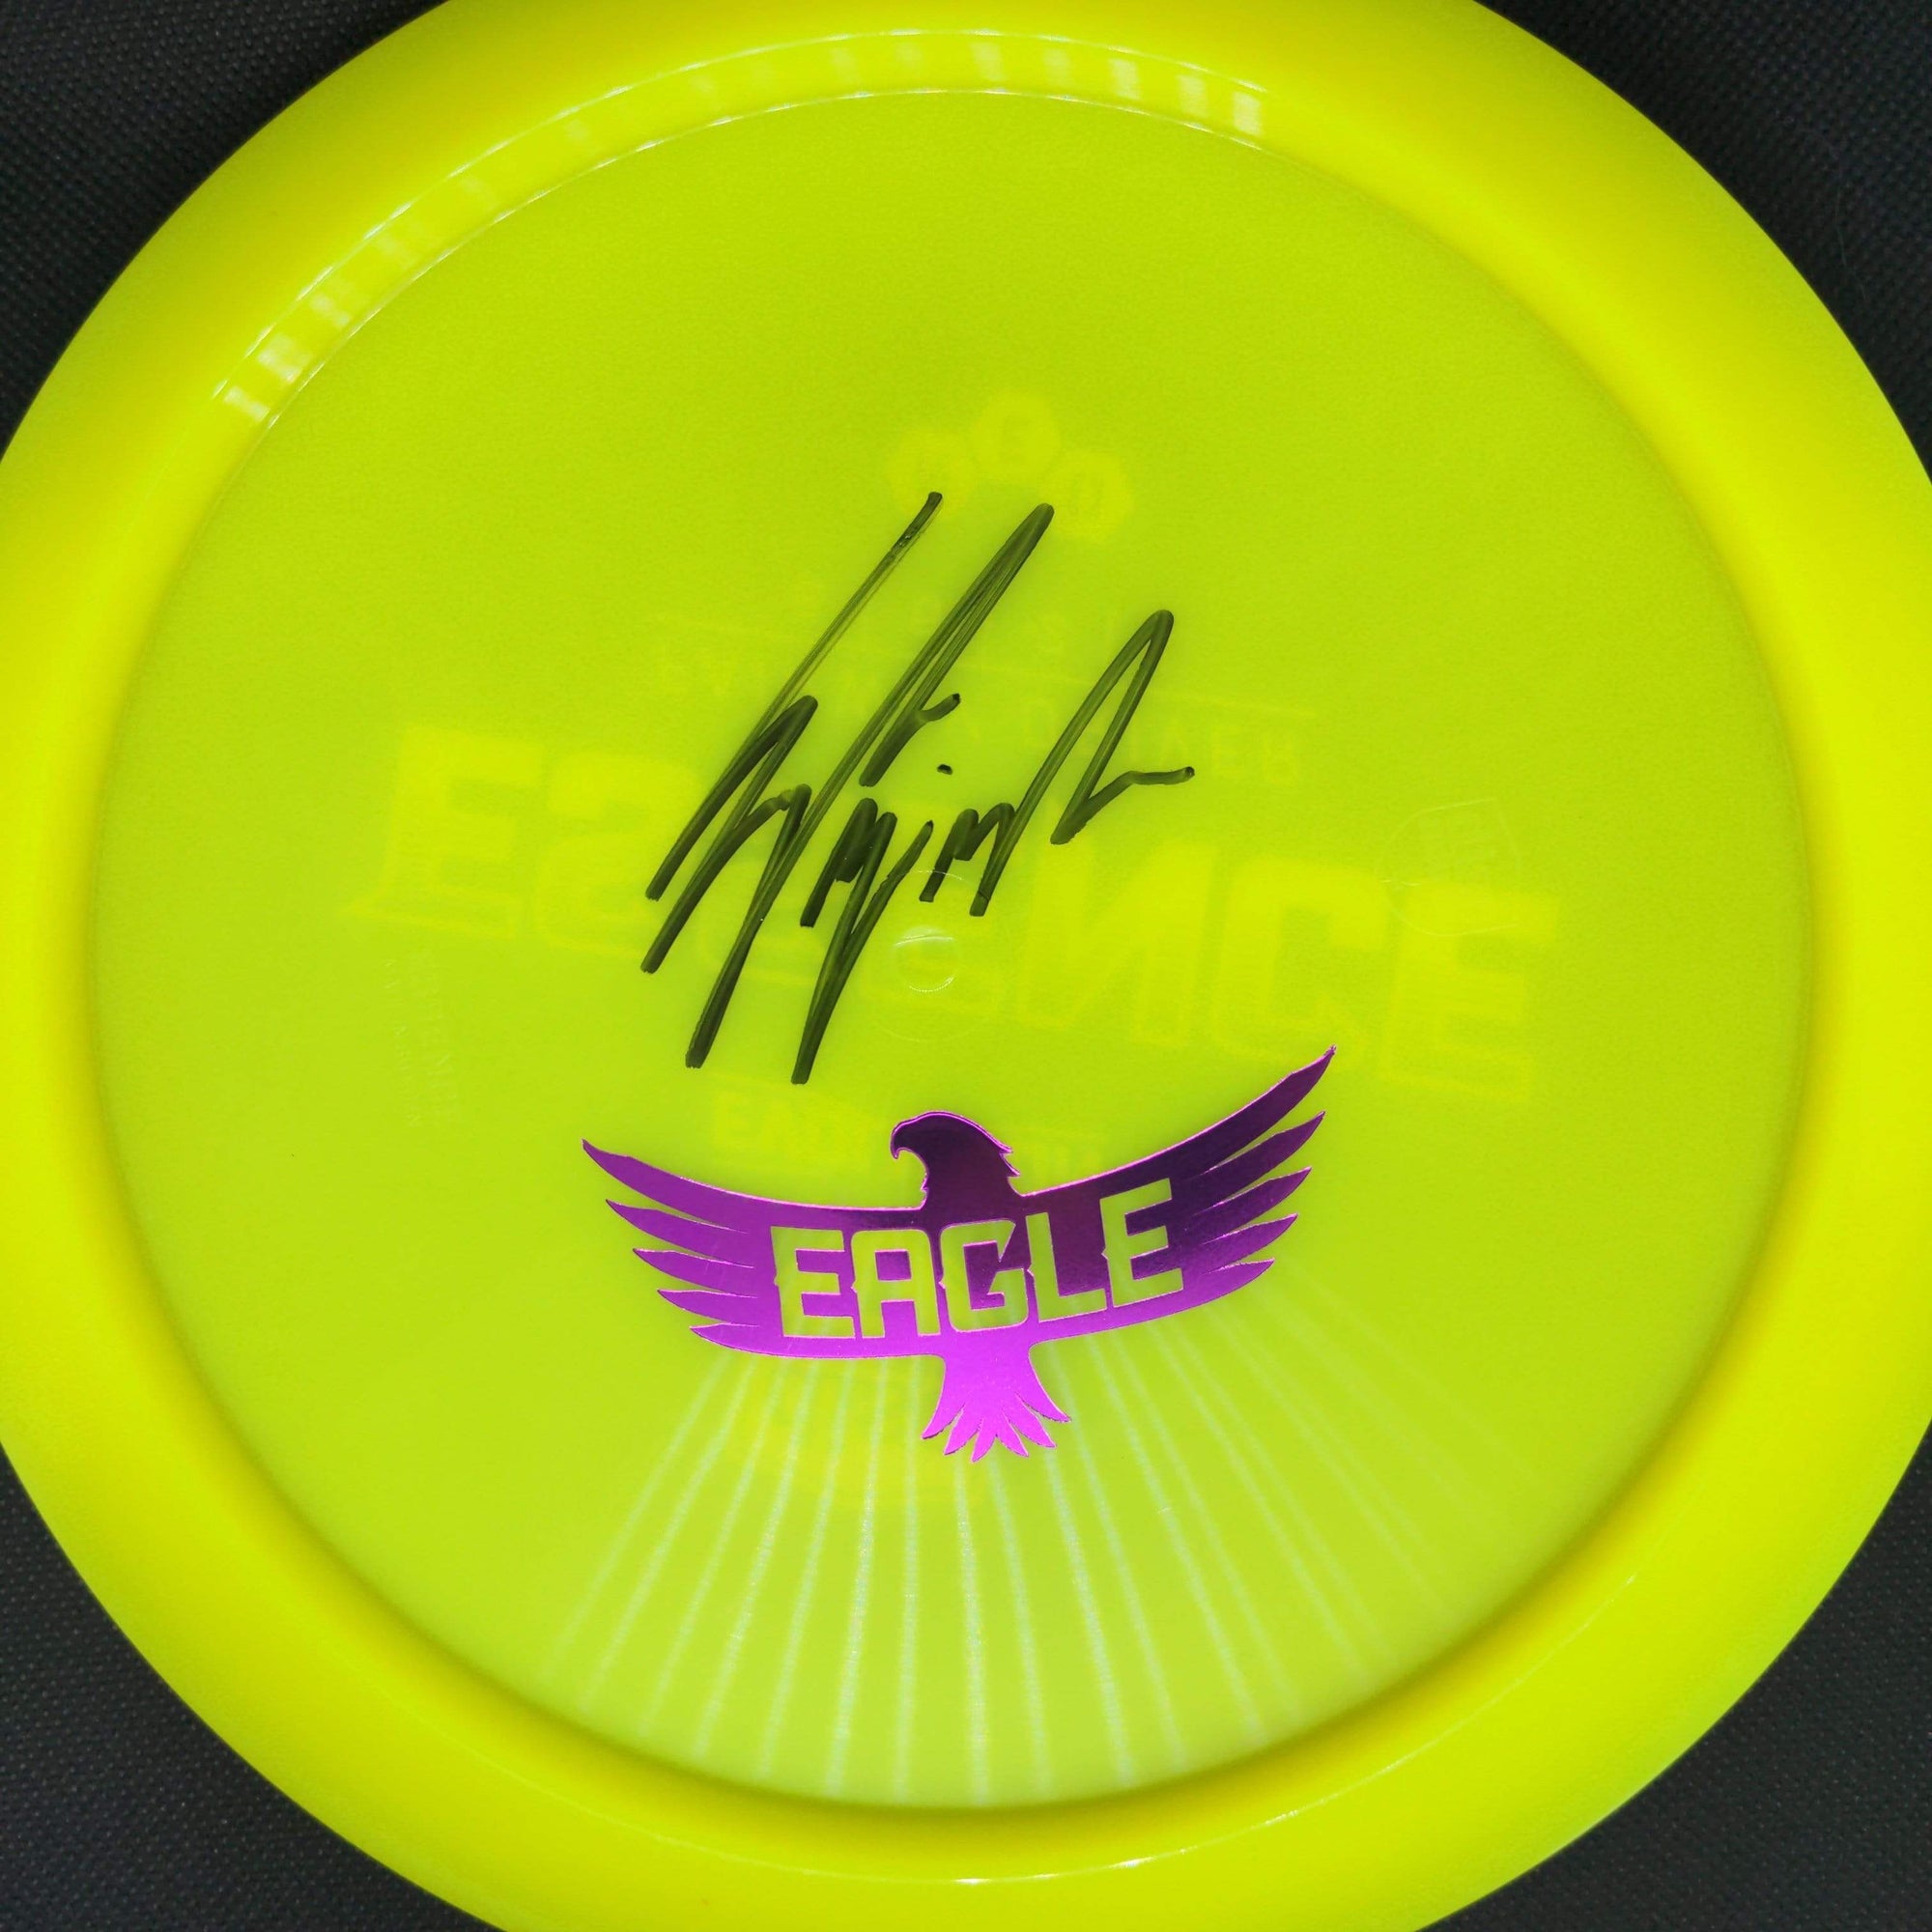 Discmania Fairway Driver Signed Eagle McHAYHAM, Neo Essence, With Eagle Stamp, 174g